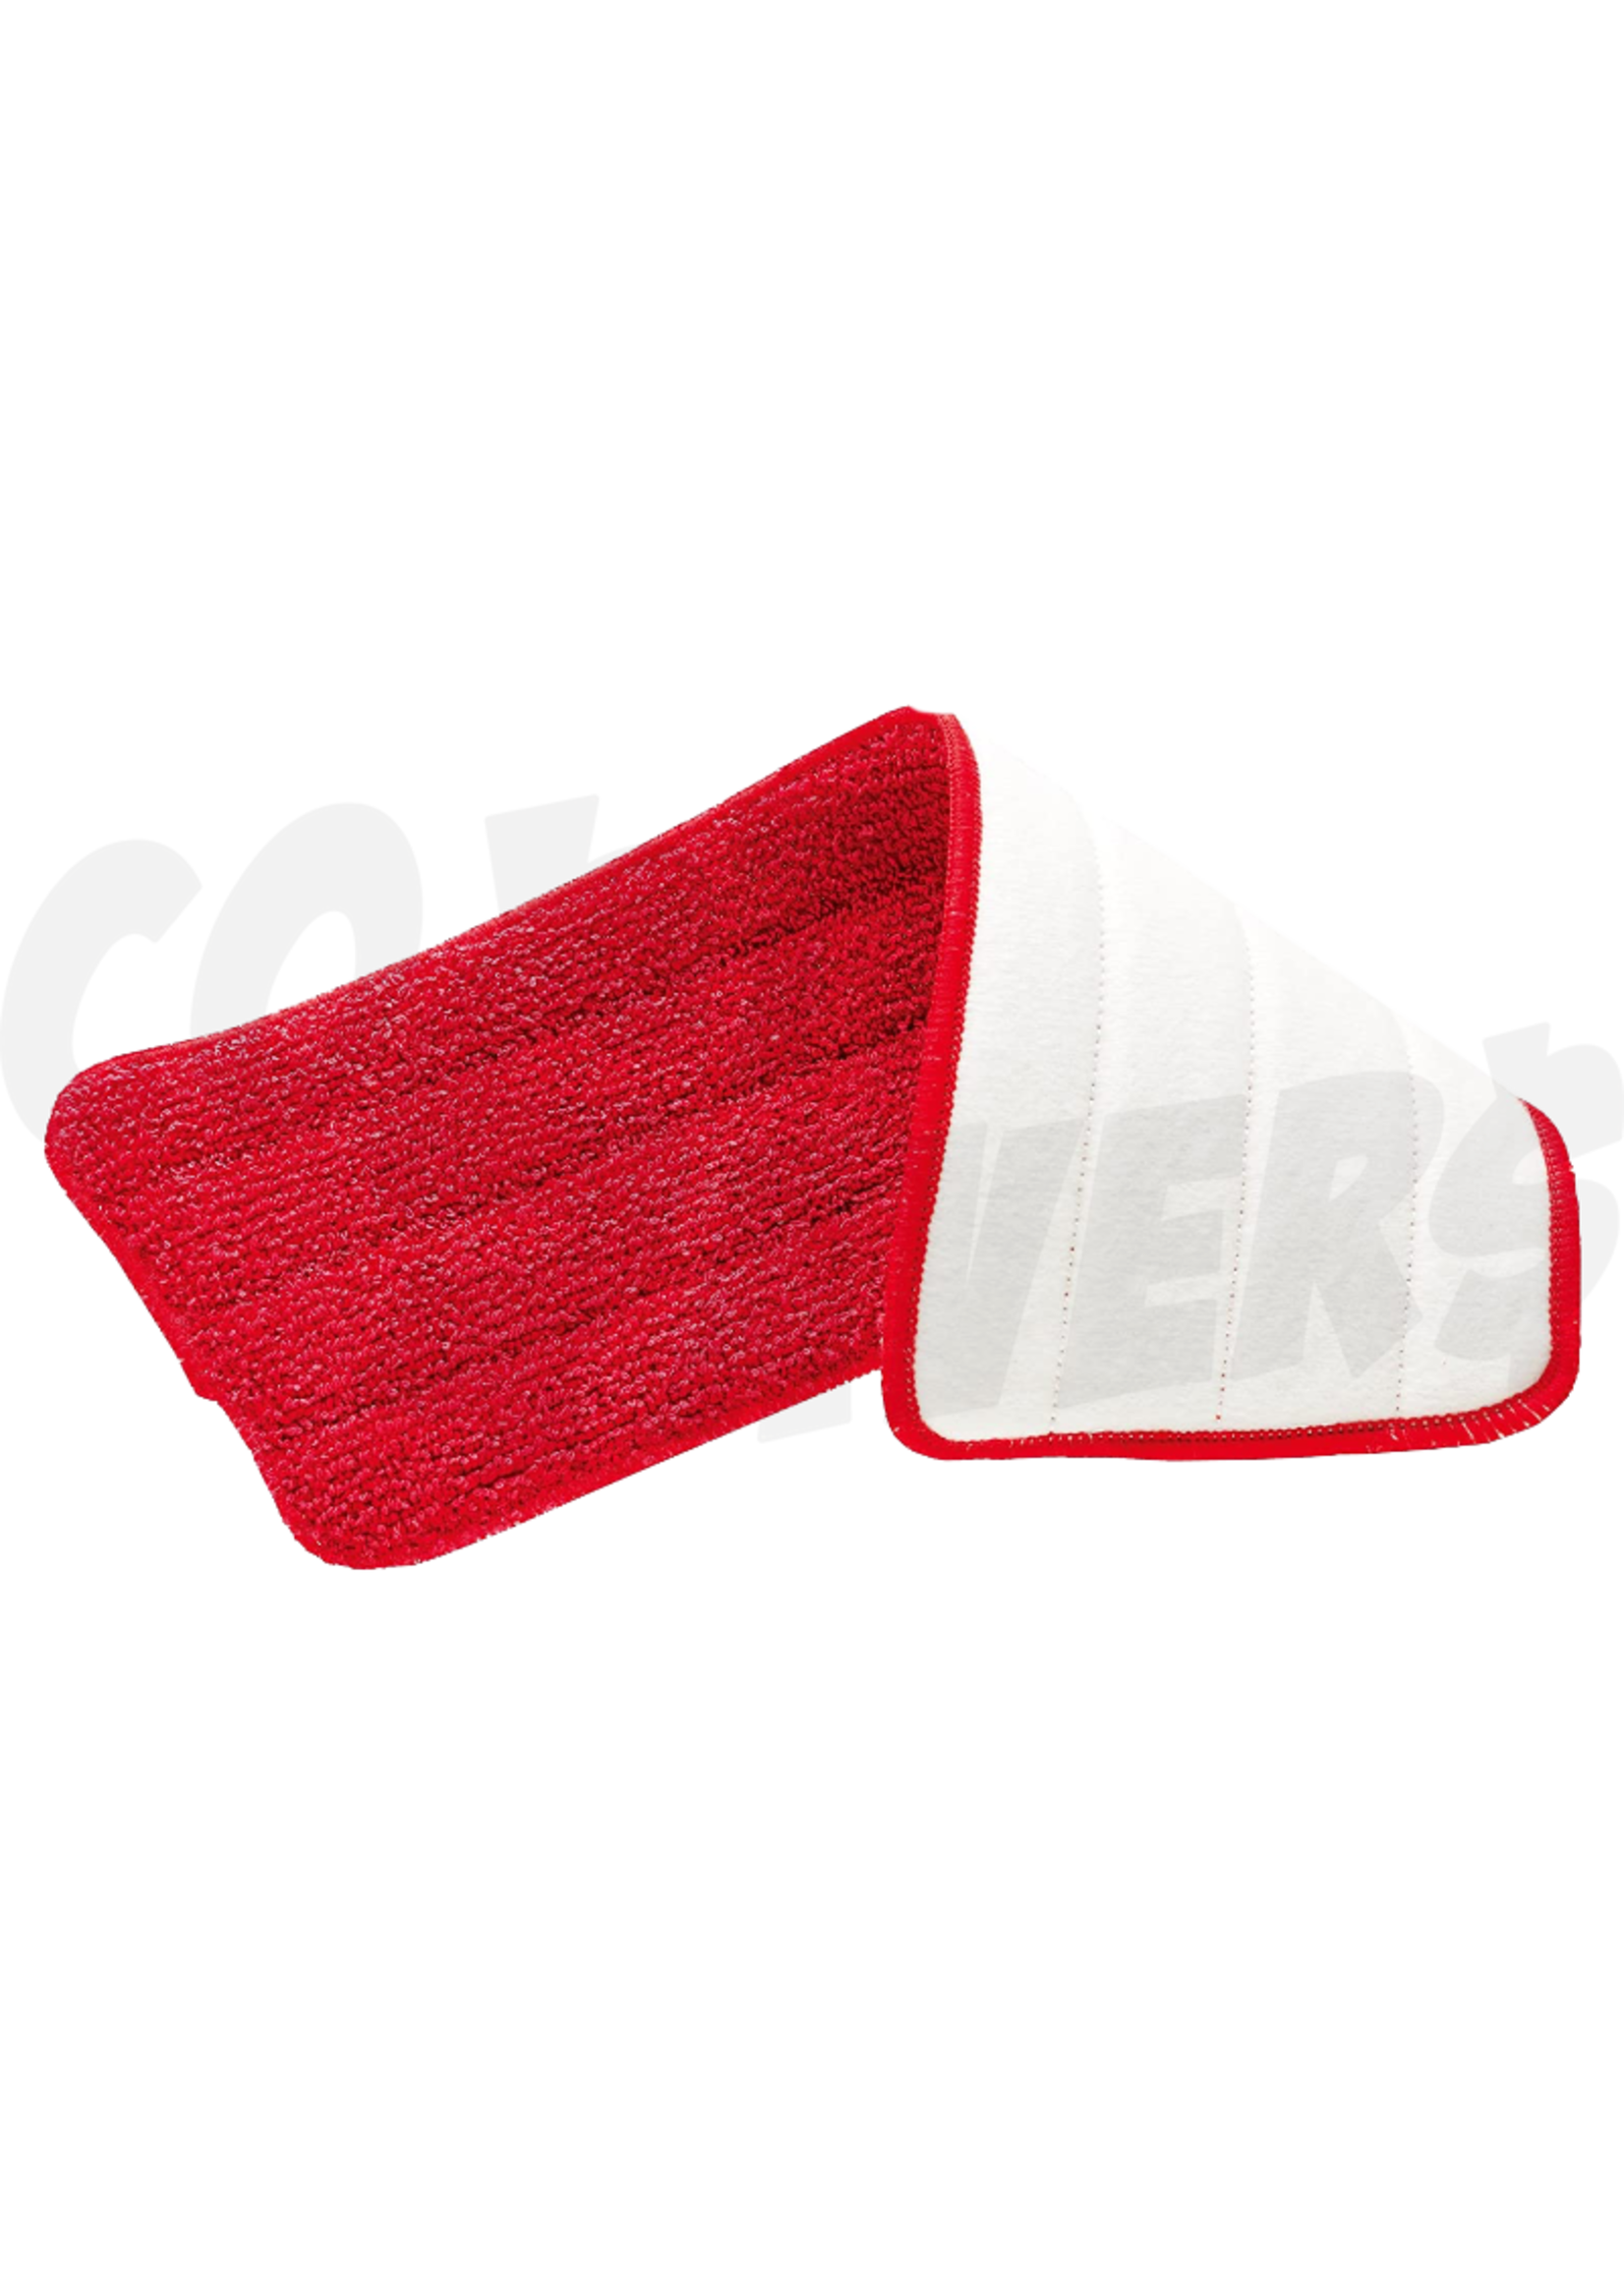 Rubbermaid Reveal Cleaning Pad